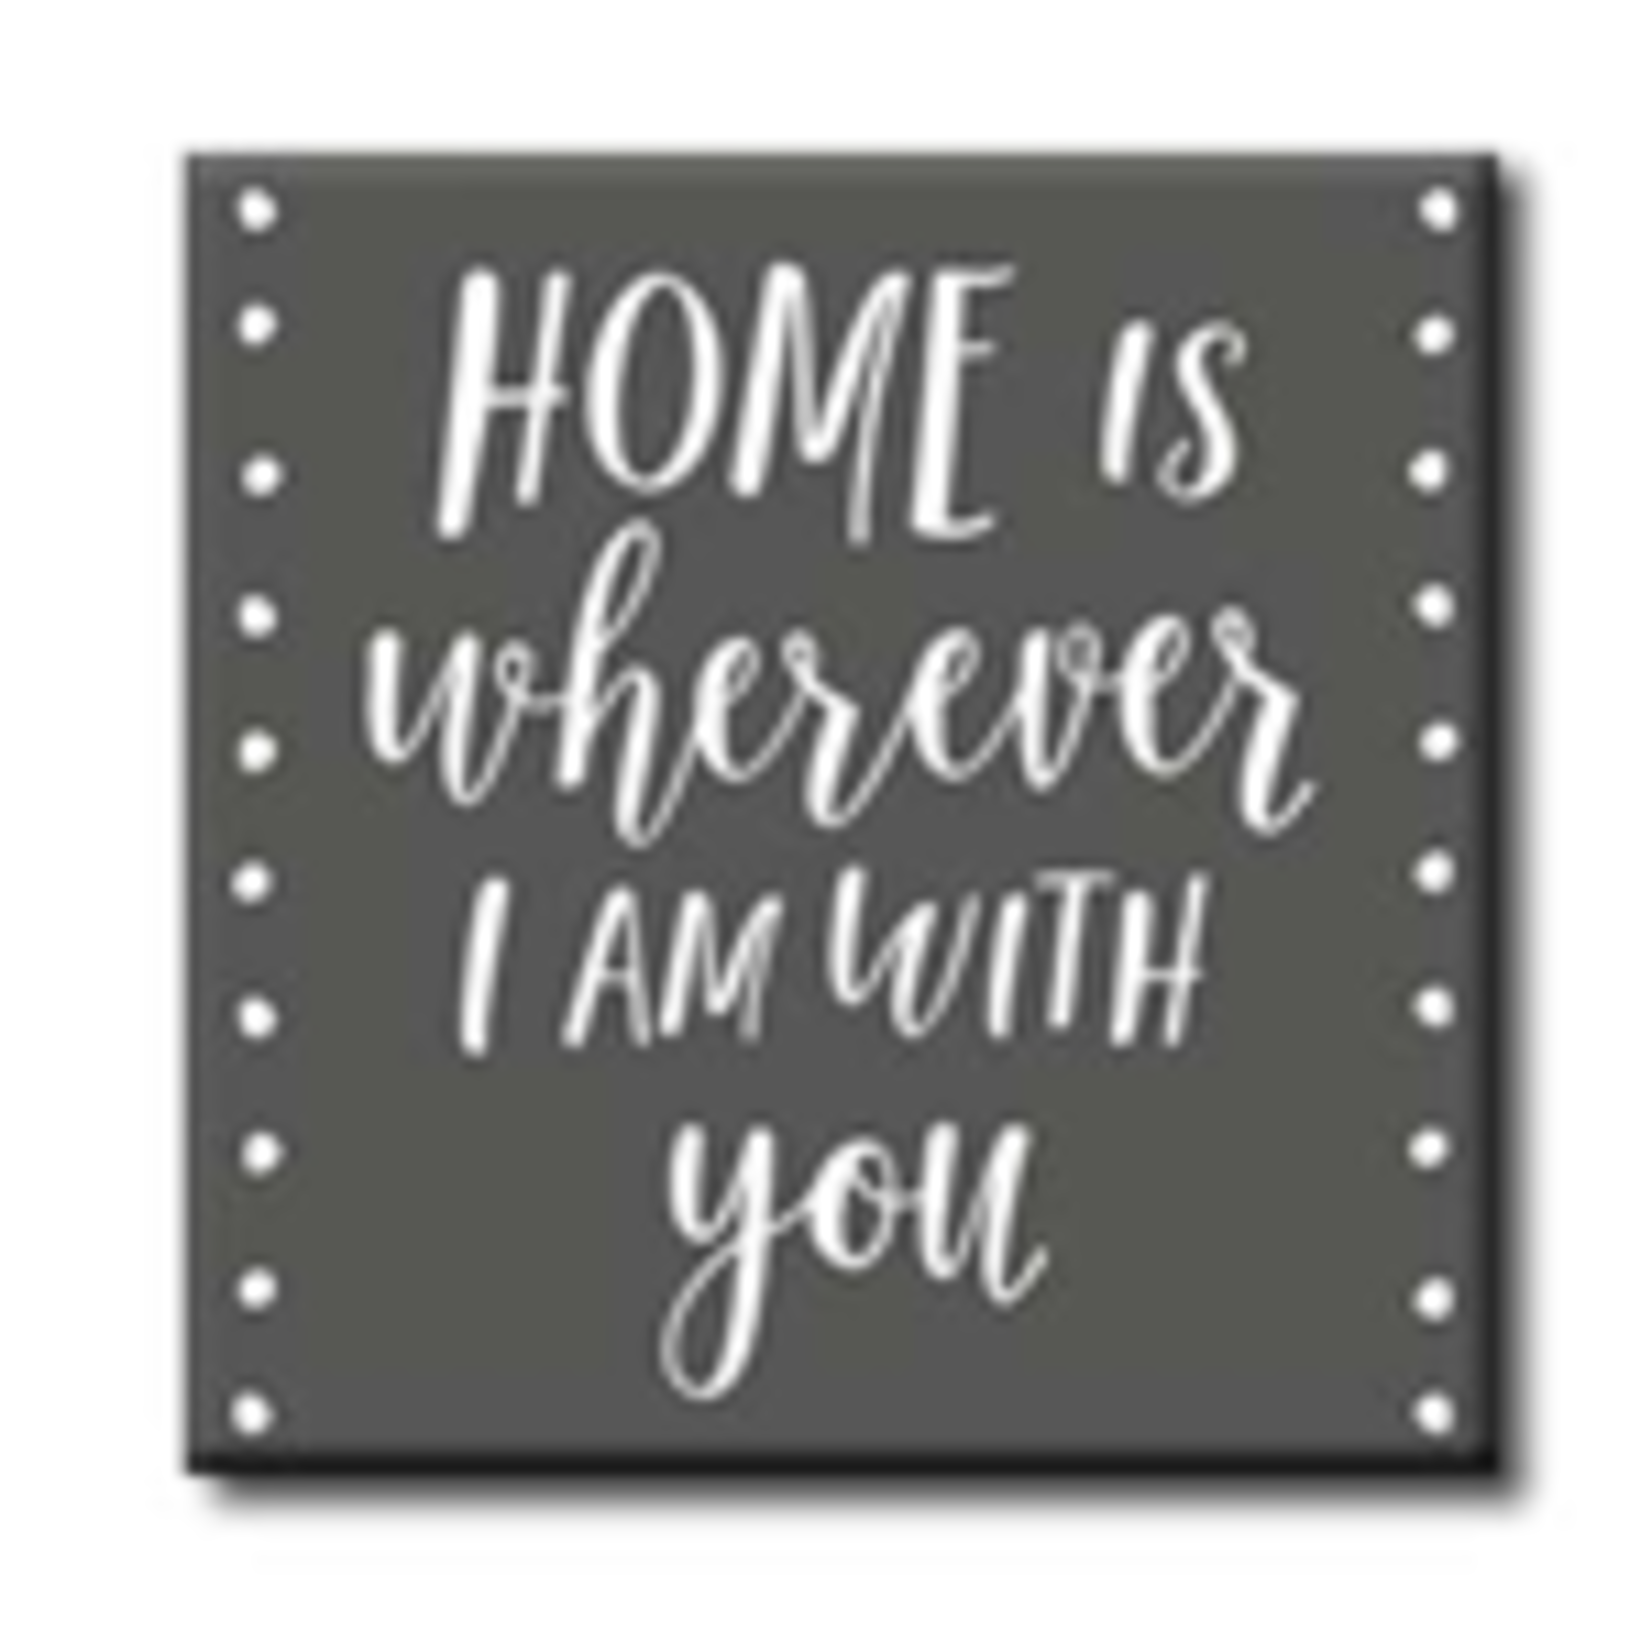 Home Is Whereever I Am With You 4x4